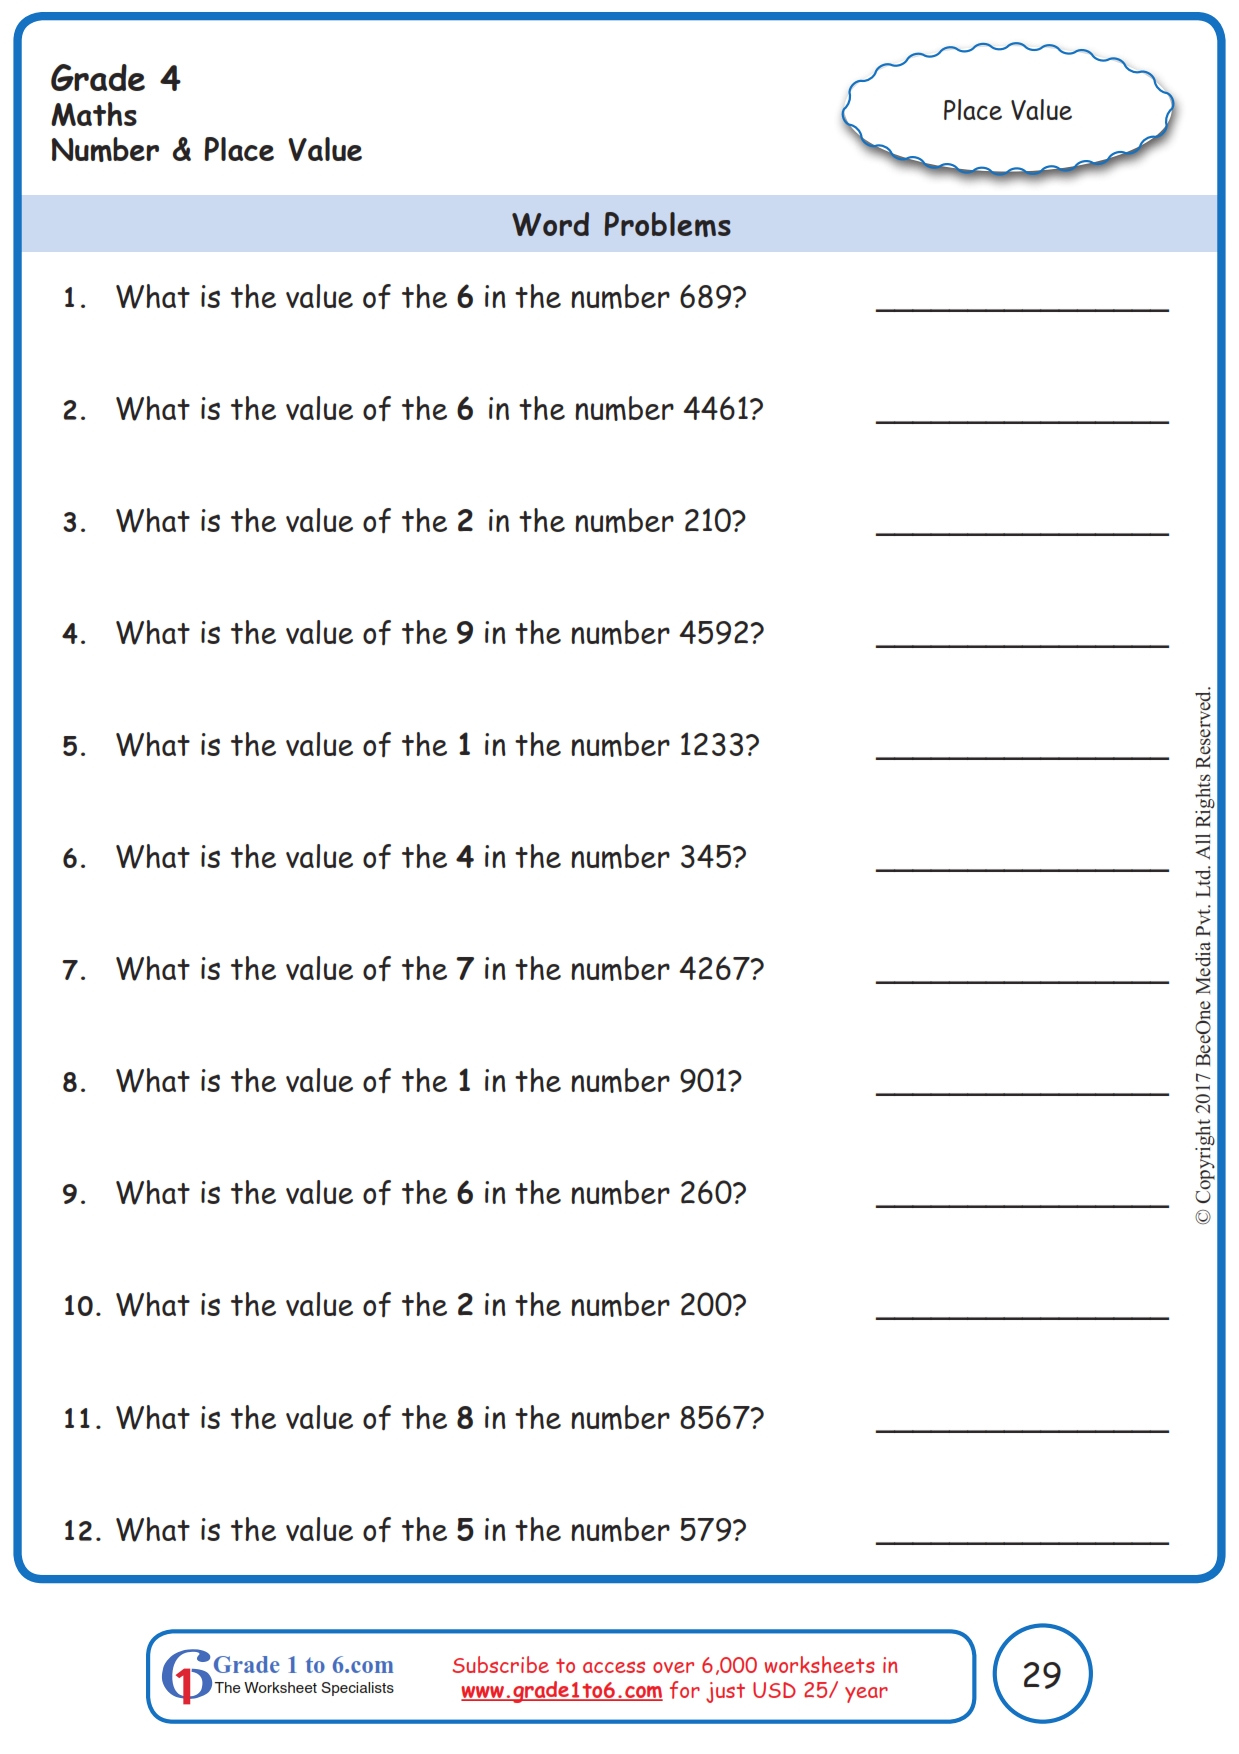 Grade 4 Place Value Worksheets www grade1to6